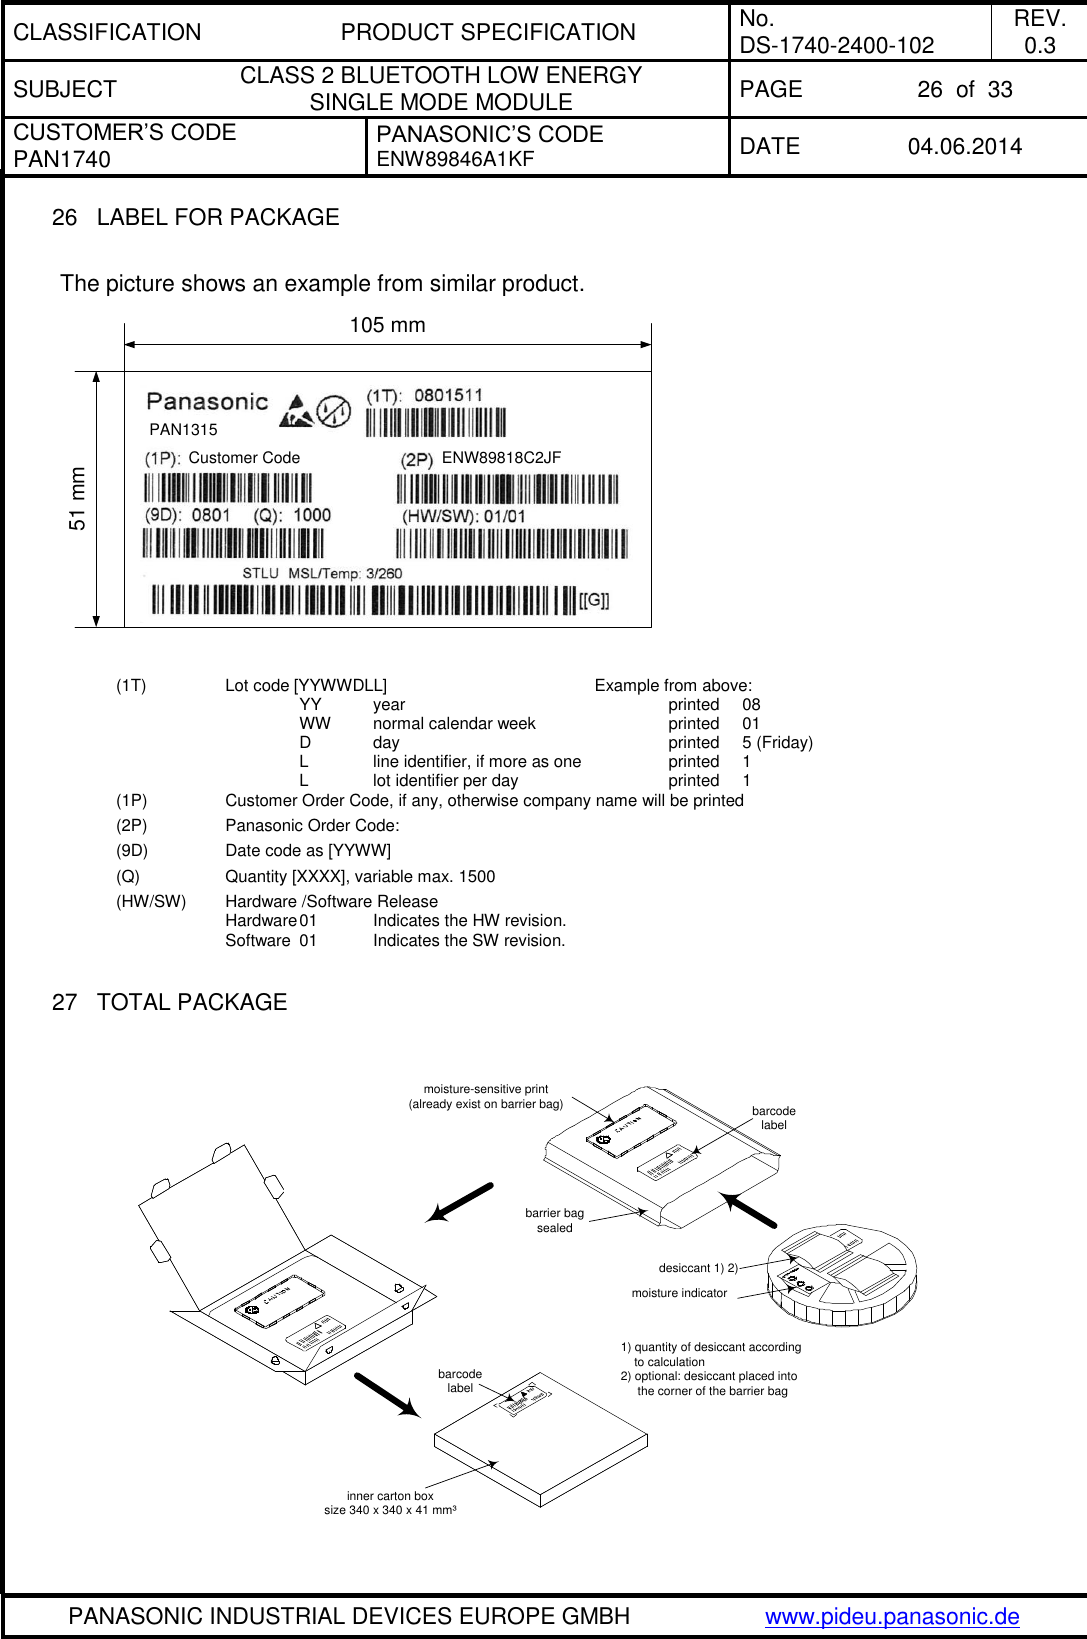 CLASSIFICATION PRODUCT SPECIFICATION No. DS-1740-2400-102 REV. 0.3 SUBJECT CLASS 2 BLUETOOTH LOW ENERGY  SINGLE MODE MODULE PAGE 26  of  33 CUSTOMER’S CODE PAN1740 PANASONIC’S CODE ENW89846A1KF DATE 04.06.2014   PANASONIC INDUSTRIAL DEVICES EUROPE GMBH www.pideu.panasonic.de  26  LABEL FOR PACKAGE  The picture shows an example from similar product. PAN1315Customer Code ENW89818C2JF105 mm51 mm  (1T)   Lot code [YYWWDLL]       Example from above:       YY  year        printed  08       WW  normal calendar week    printed  01       D  day        printed  5 (Friday)       L  line identifier, if more as one     printed  1       L  lot identifier per day     printed  1 (1P)   Customer Order Code, if any, otherwise company name will be printed (2P)   Panasonic Order Code:  (9D)   Date code as [YYWW] (Q)    Quantity [XXXX], variable max. 1500 (HW/SW)  Hardware /Software Release           Hardware 01  Indicates the HW revision.     Software  01  Indicates the SW revision.  27  TOTAL PACKAGE   barcodelabelmoisture-sensitive print(already exist on barrier bag) barcodelabeldesiccant 1) 2)moisture indicatorbarrier bagsealedinner carton boxsize 340 x 340 x 41 mm³1) quantity of desiccant according    to calculation2) optional: desiccant placed into     the corner of the barrier bag